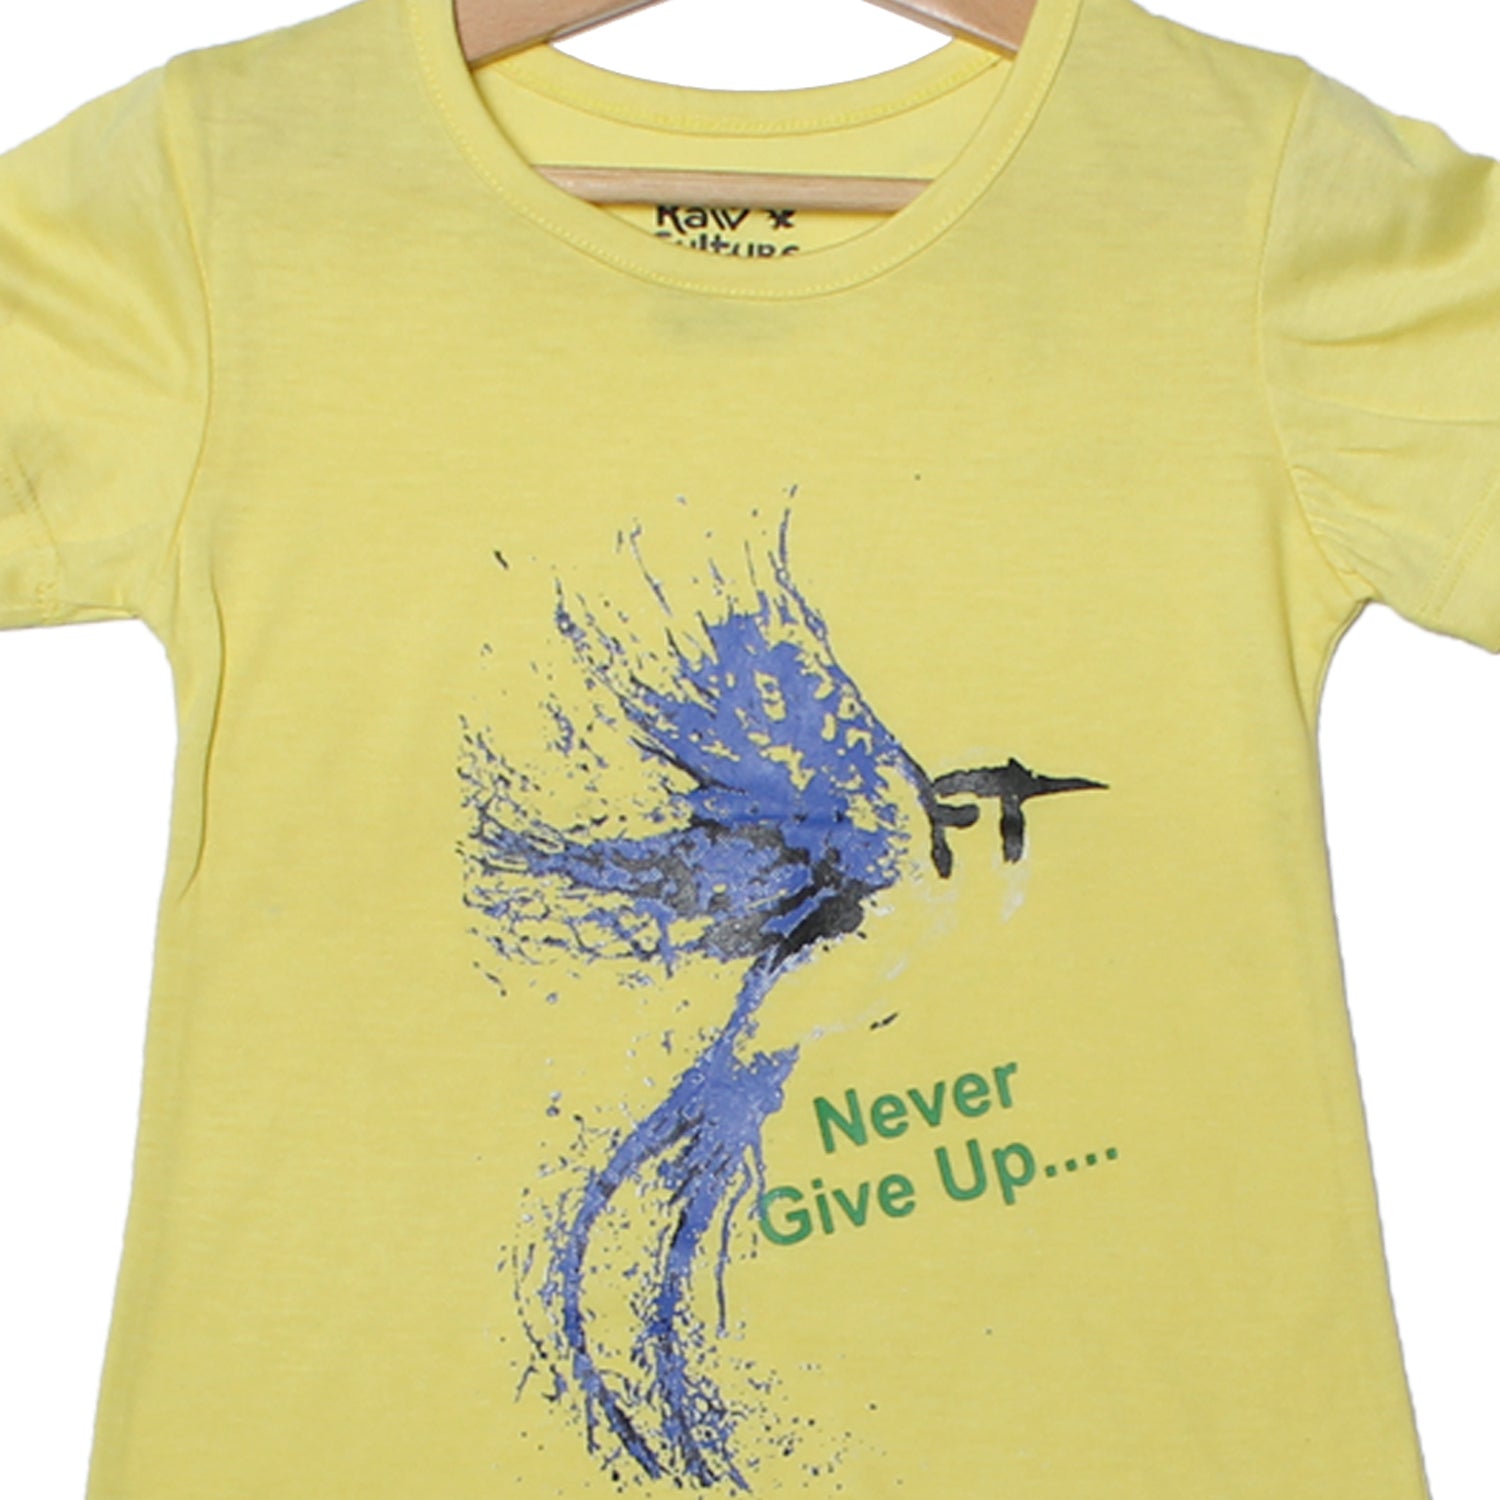 NEW YELLOW NEVER GIVE UP FLOWER PRINTED T-SHIRT TOP FOR GIRLS